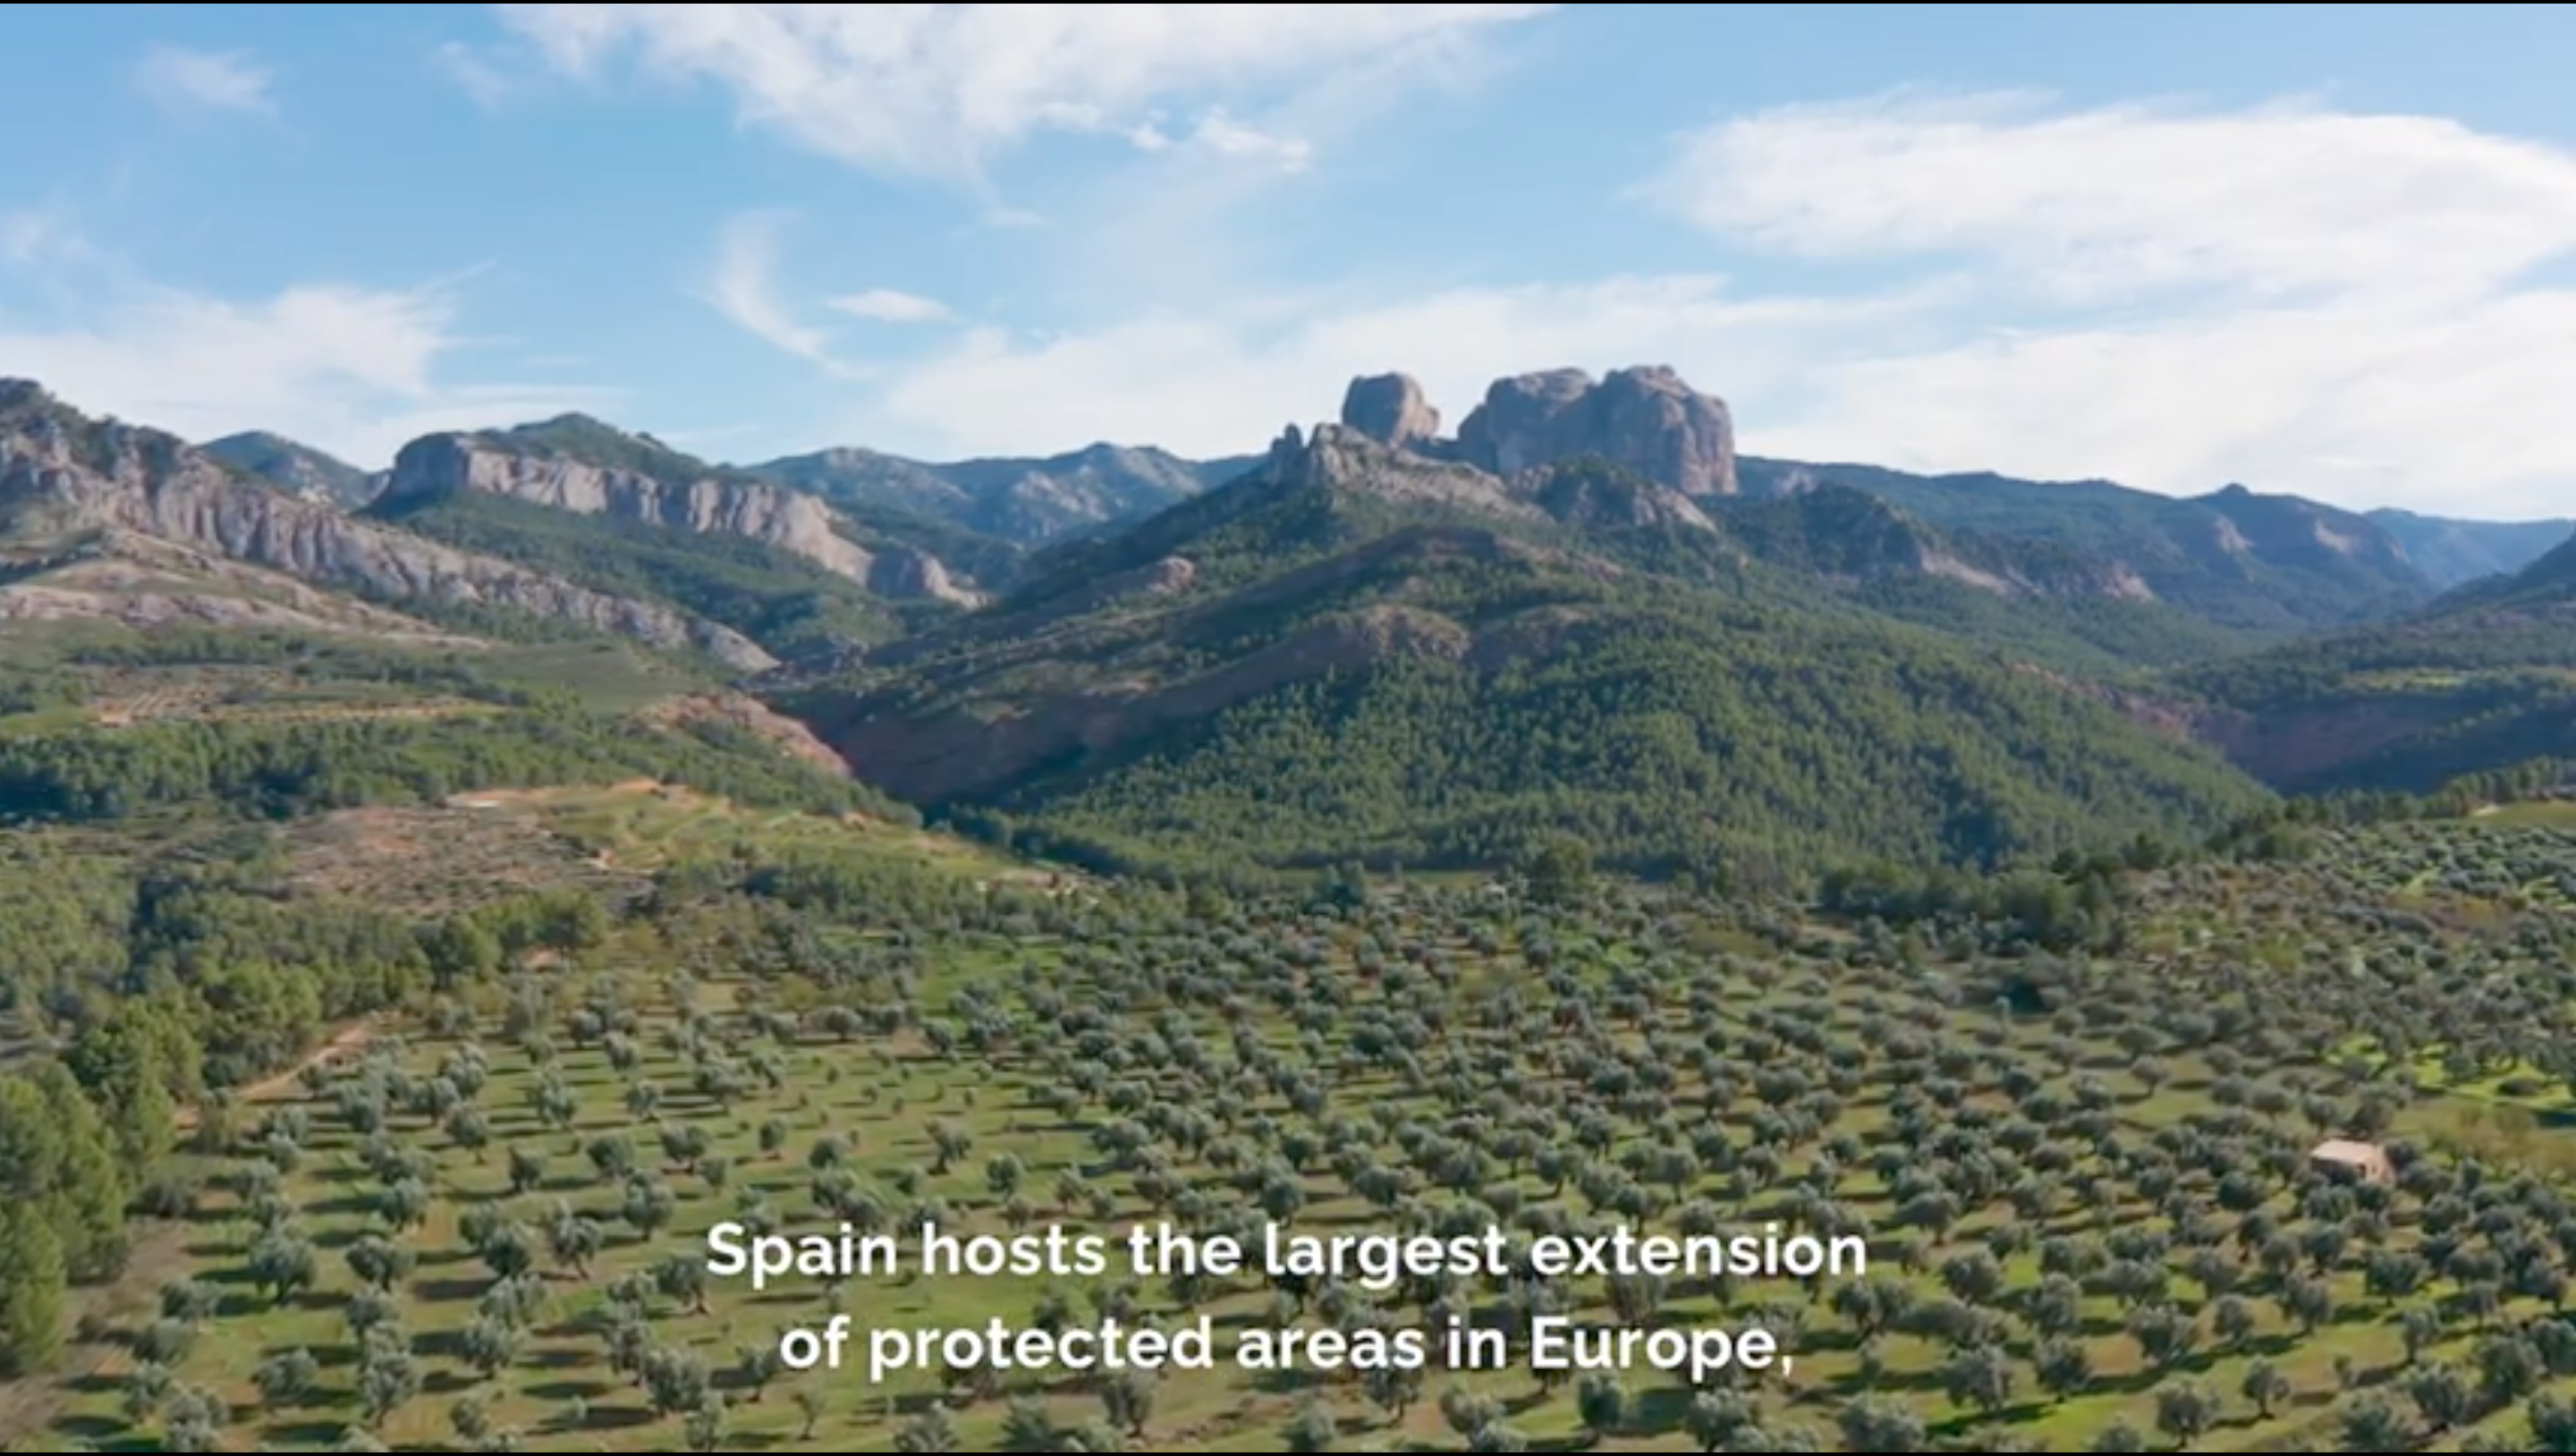 Scene from Spain's "Our Protected Areas" Series Introduction Video